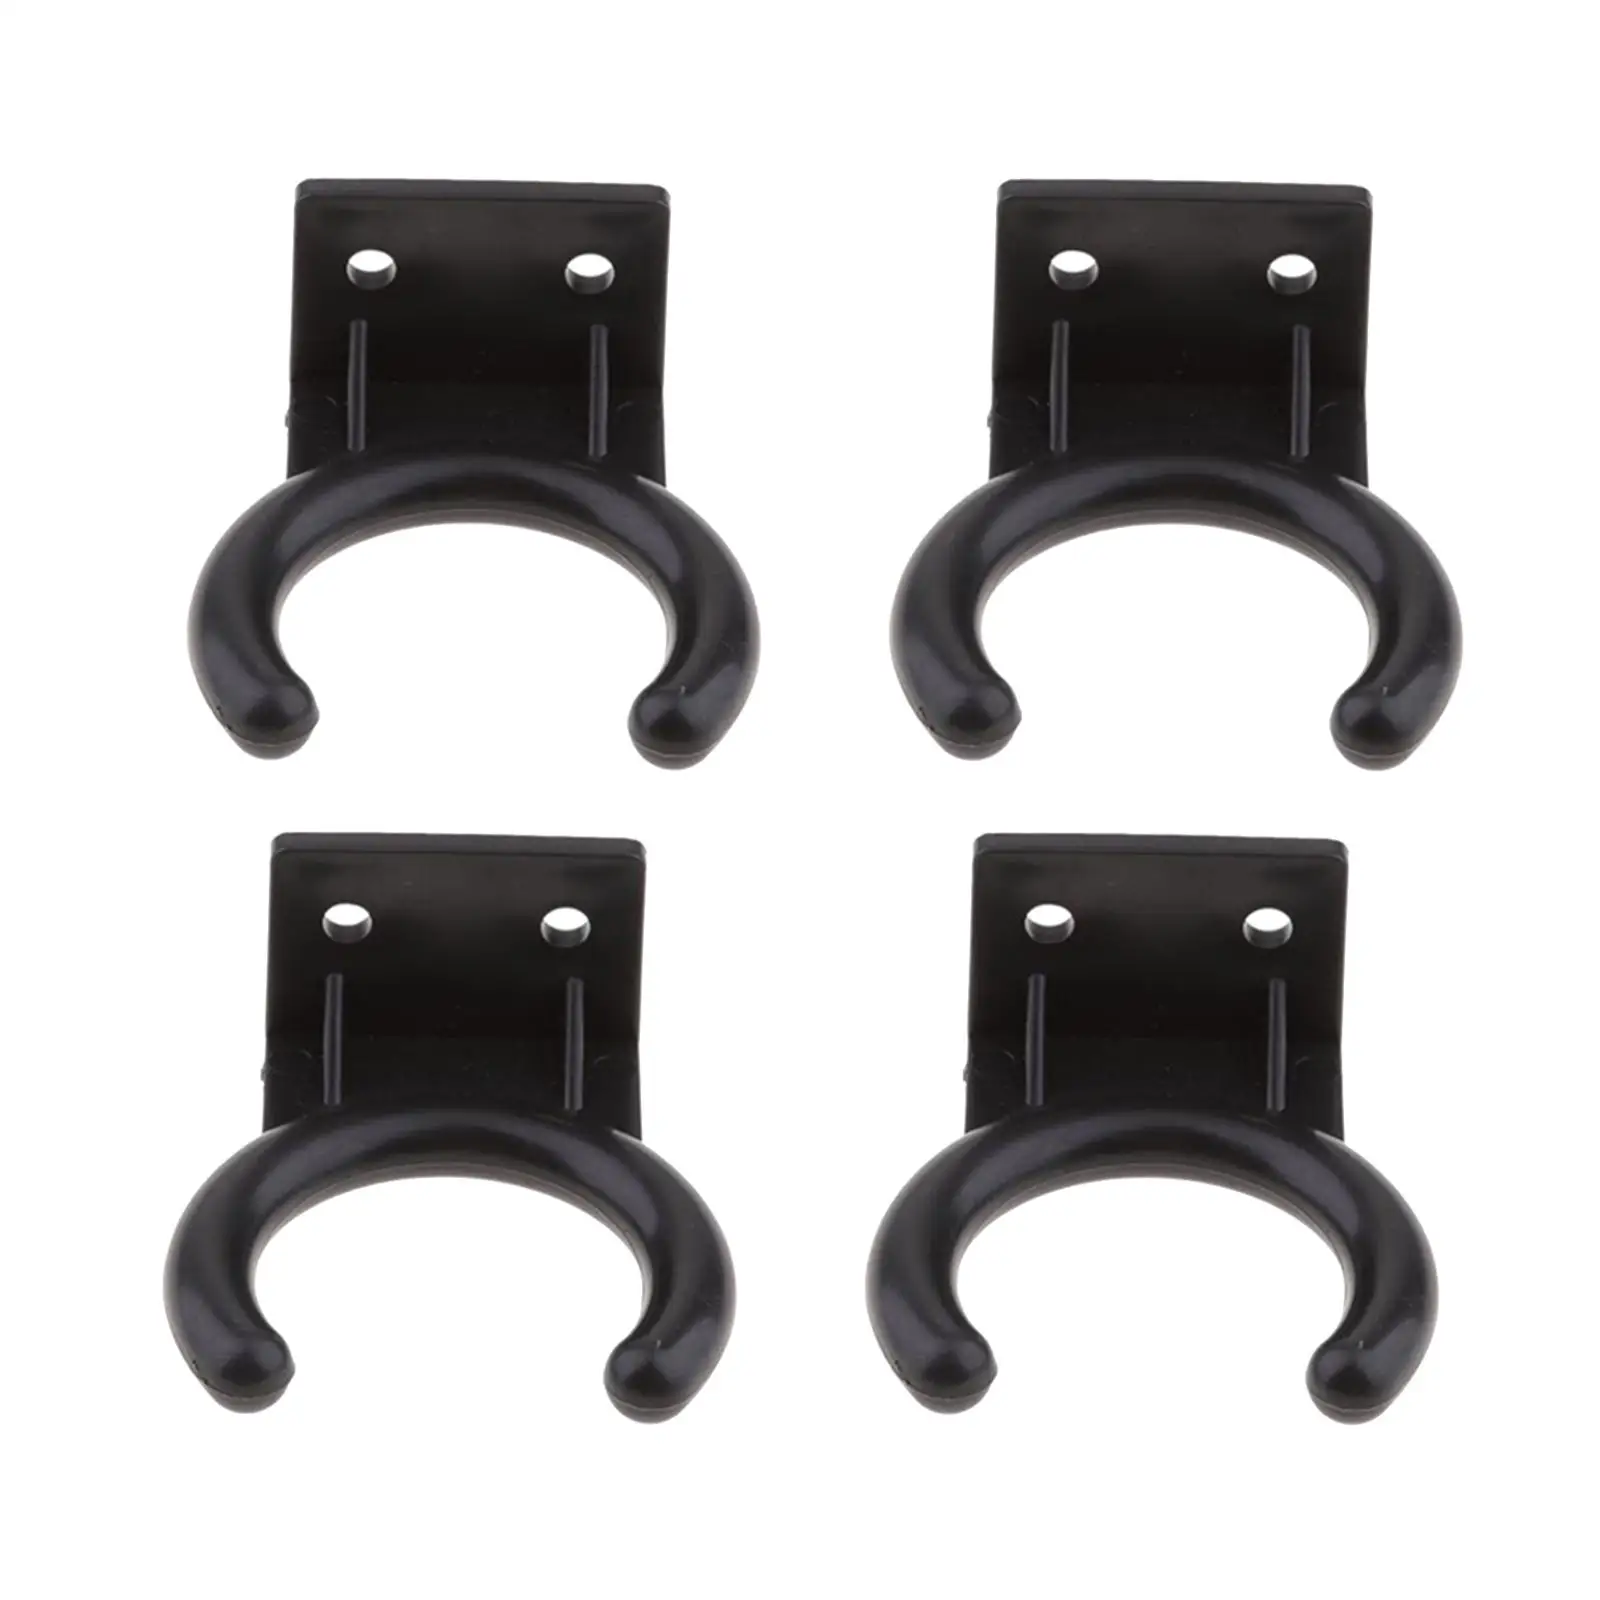 4Pcs Wall Mounted Microphone Hook Wall Hanger Stands Accessories Black Durable Rack Clip Holder for Home KTV Space Saving